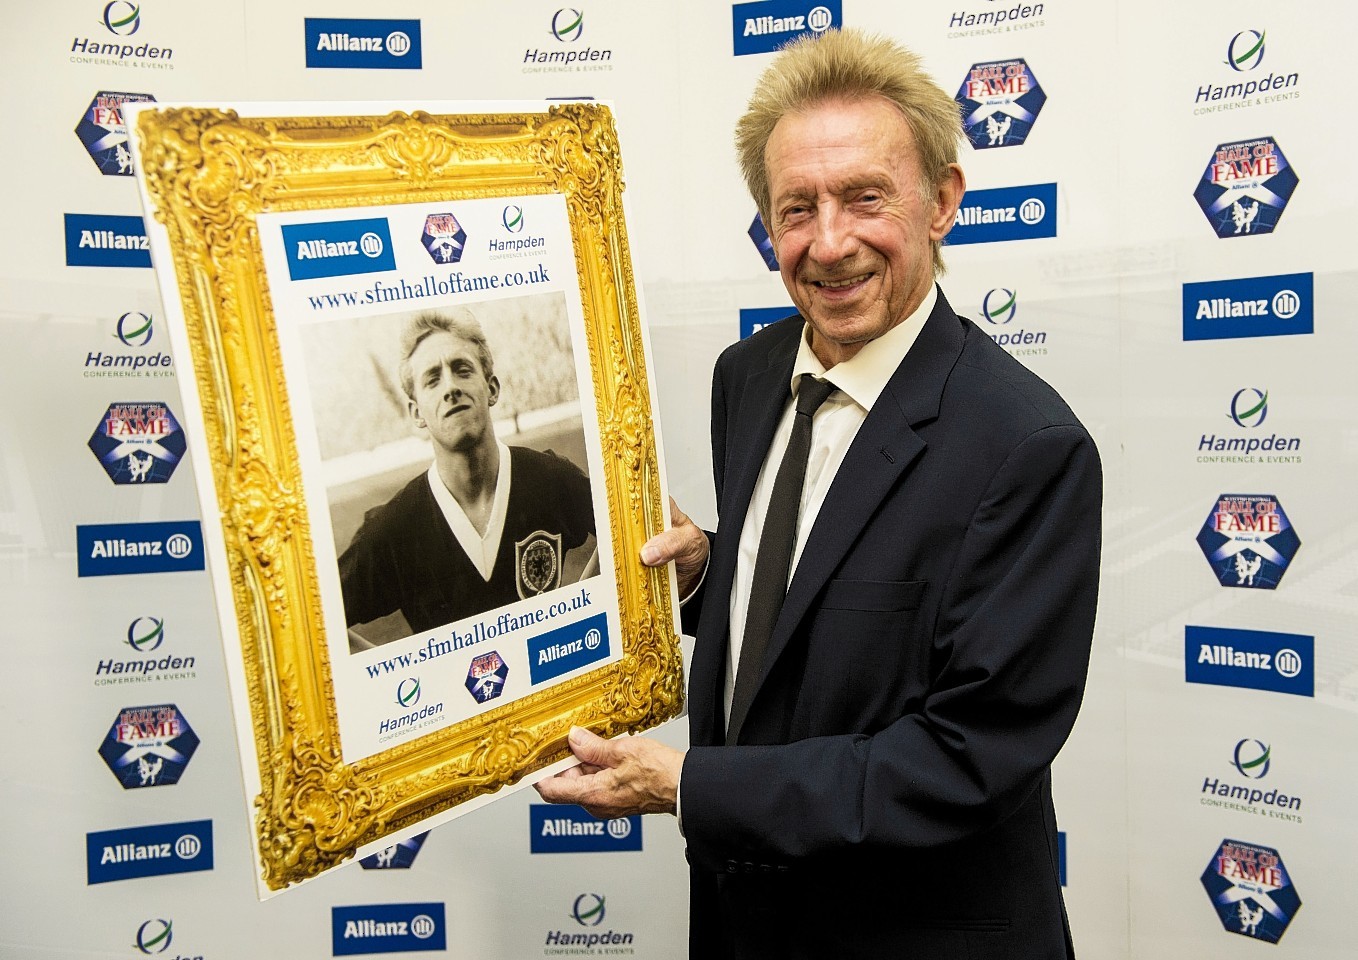 Denis Law was recently inducted into the Scotland Hall of Fame